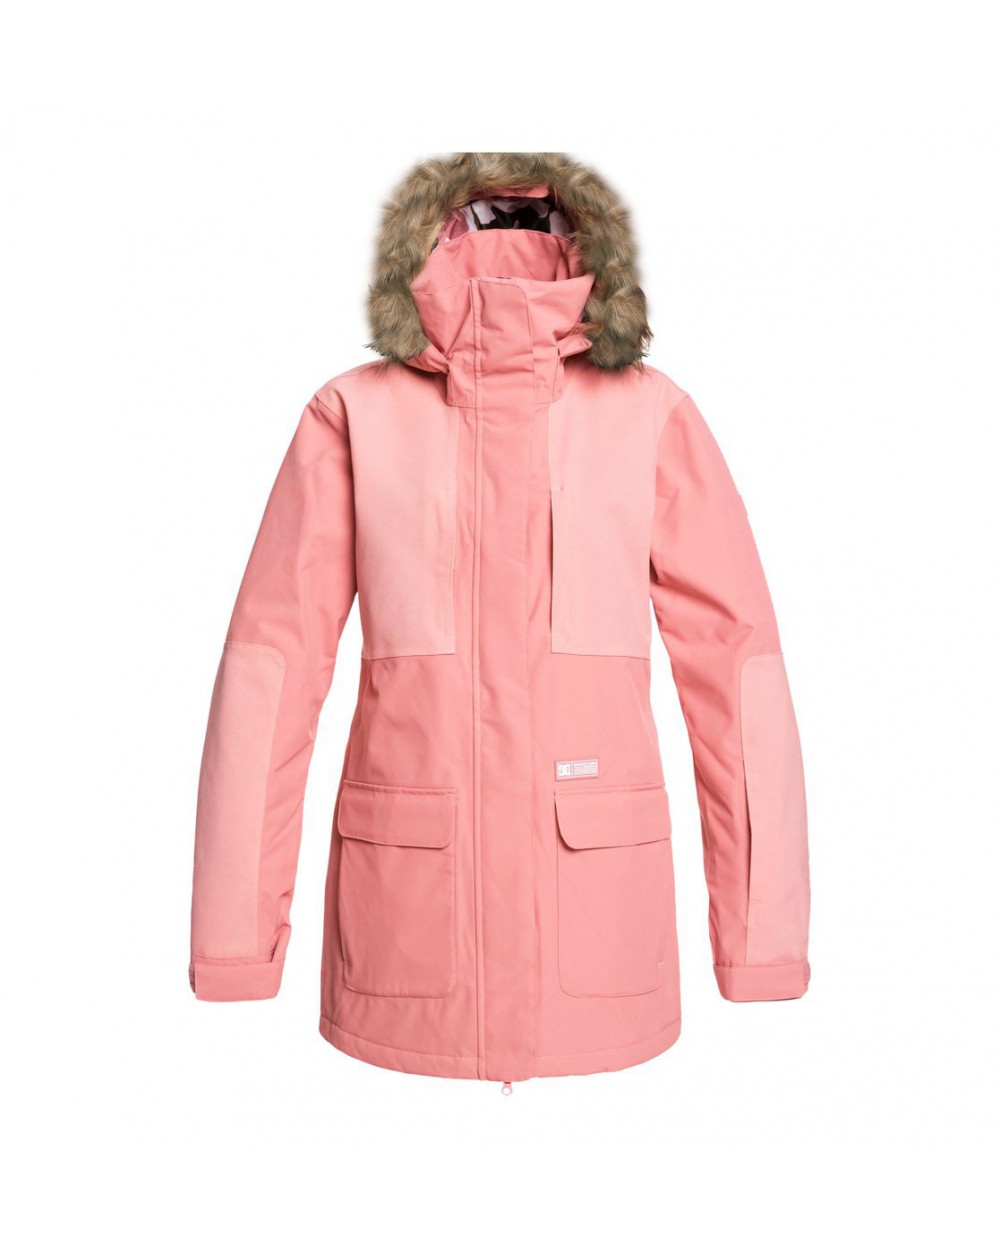 Dc Panoramic Snow Jacket - Dusty Rose